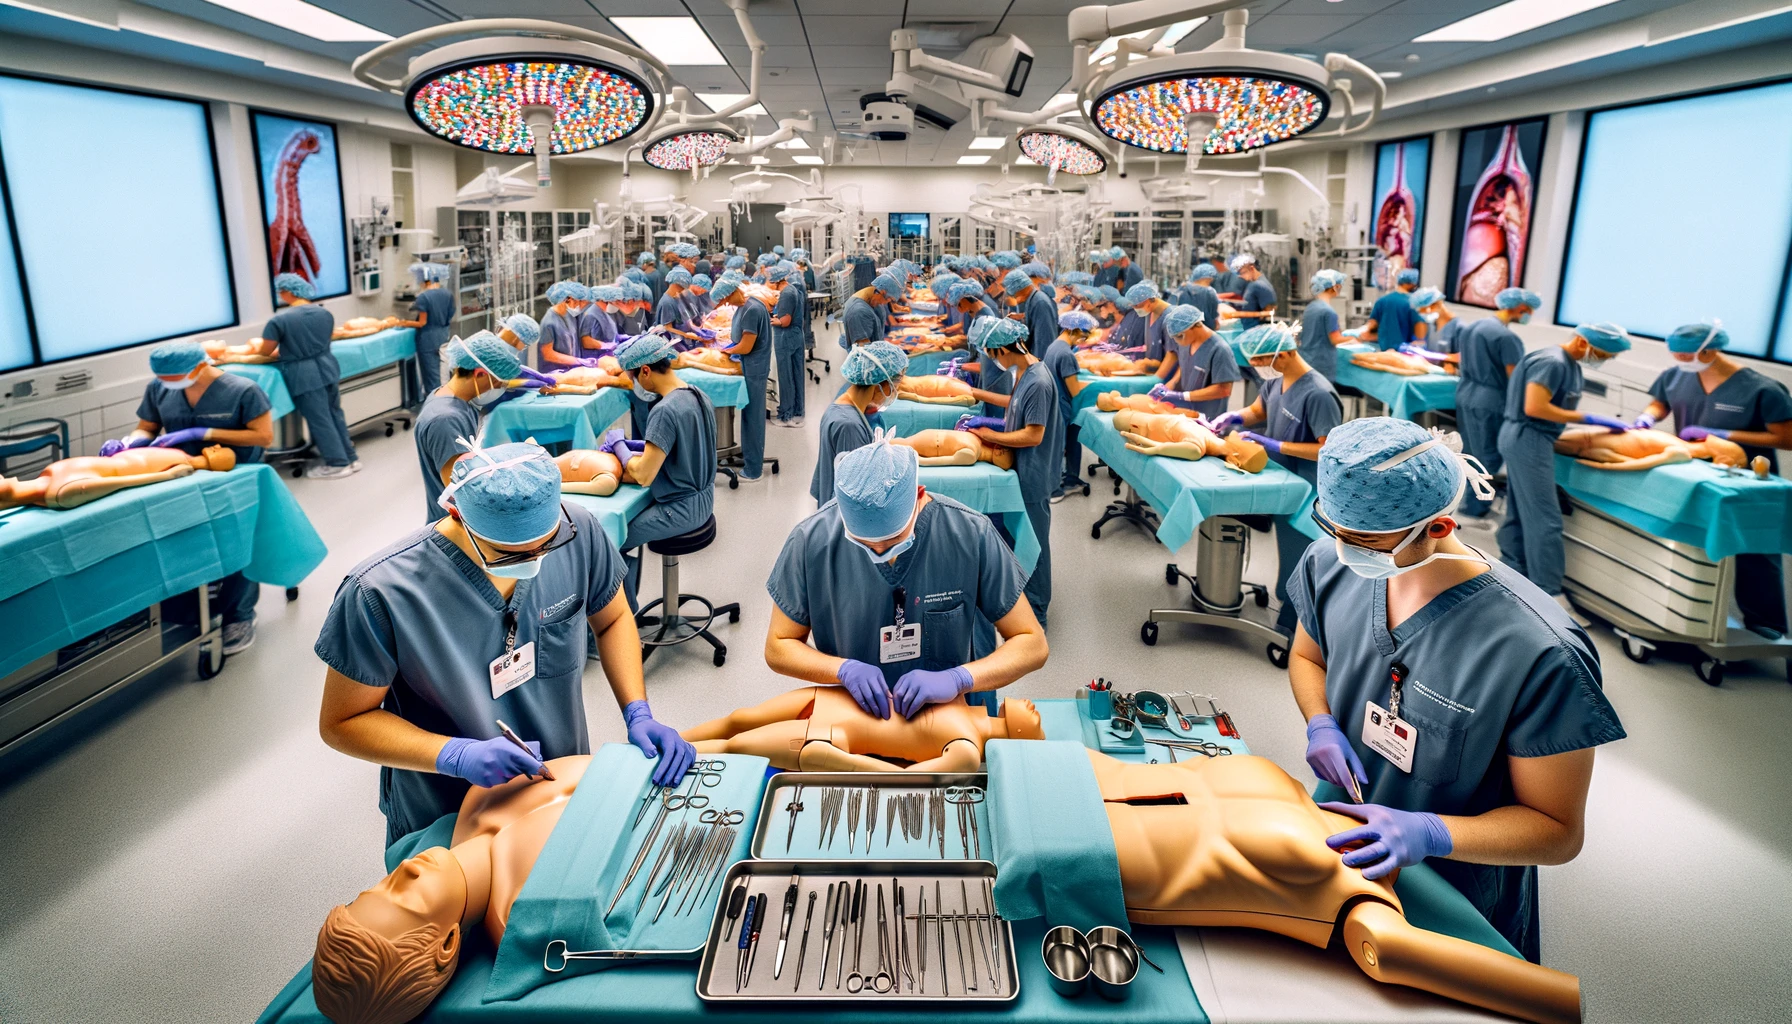 Transform Your Career in Just 6 Weeks: The Ultimate Surgical Tech Program